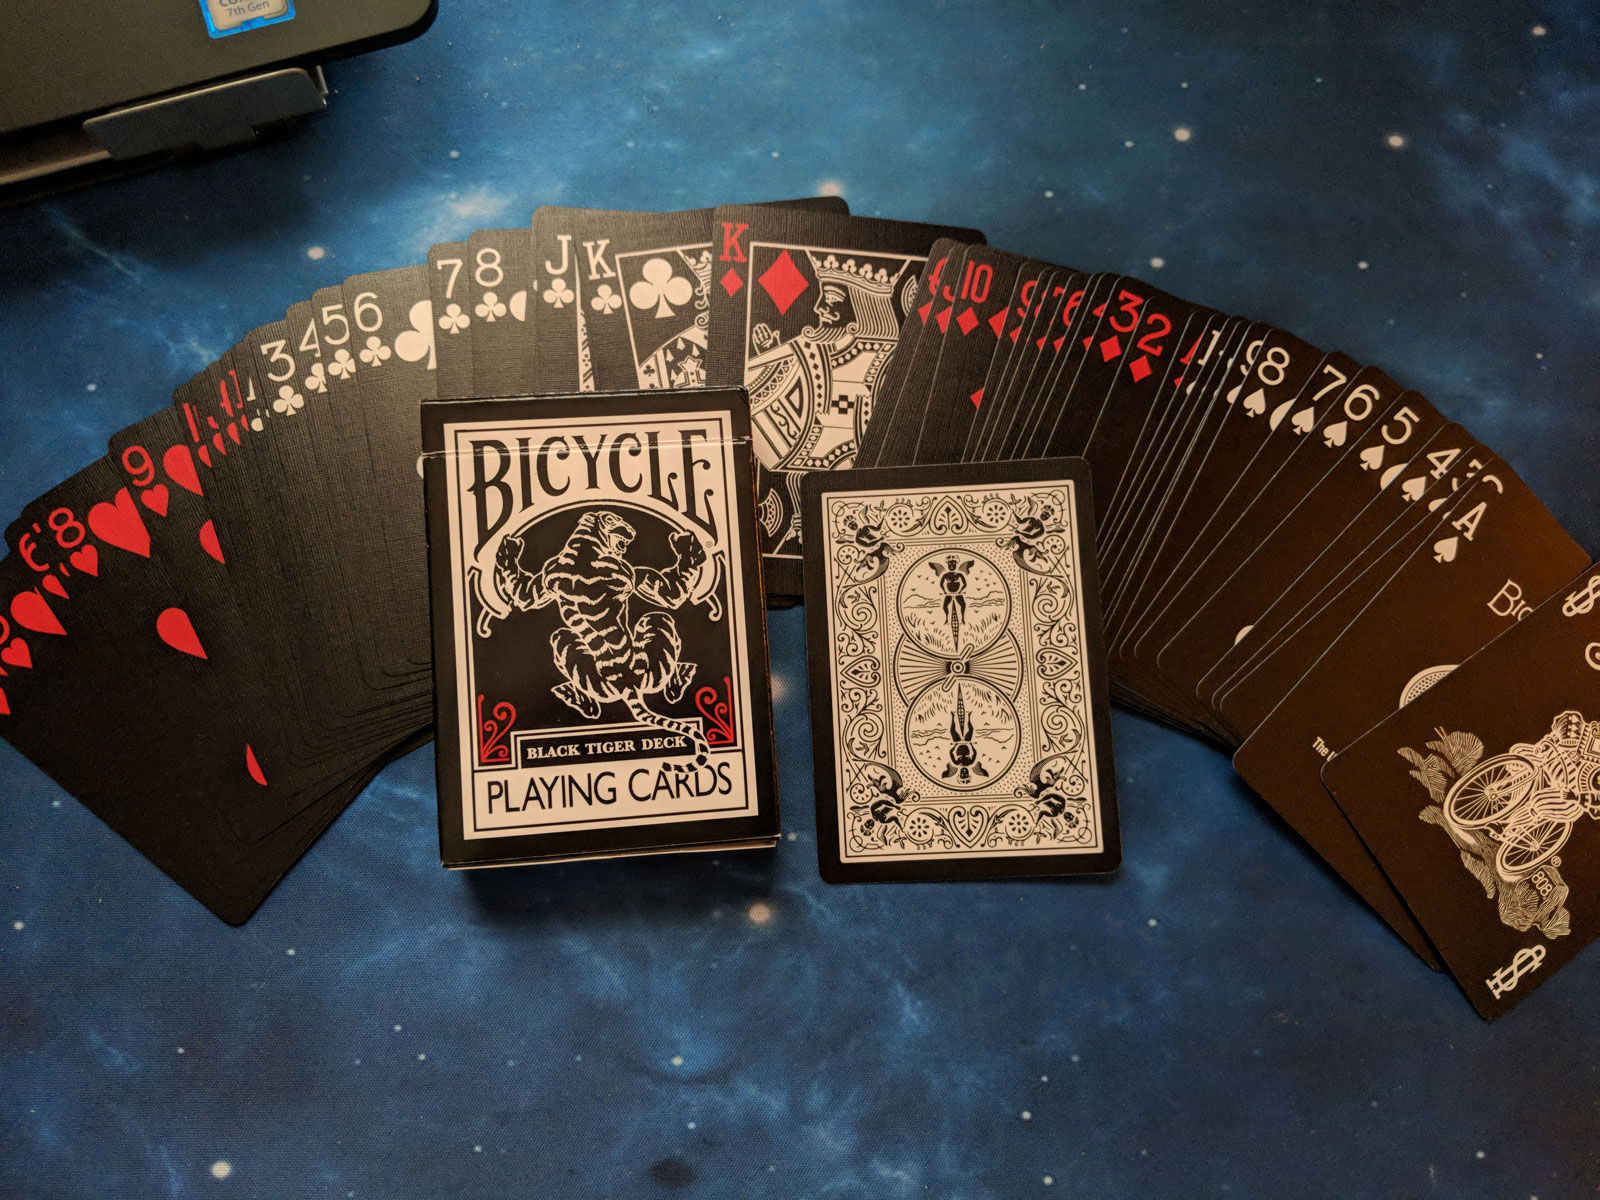 235-2353548_devil-bicycle-playing-cards.jpg (1600×1200)